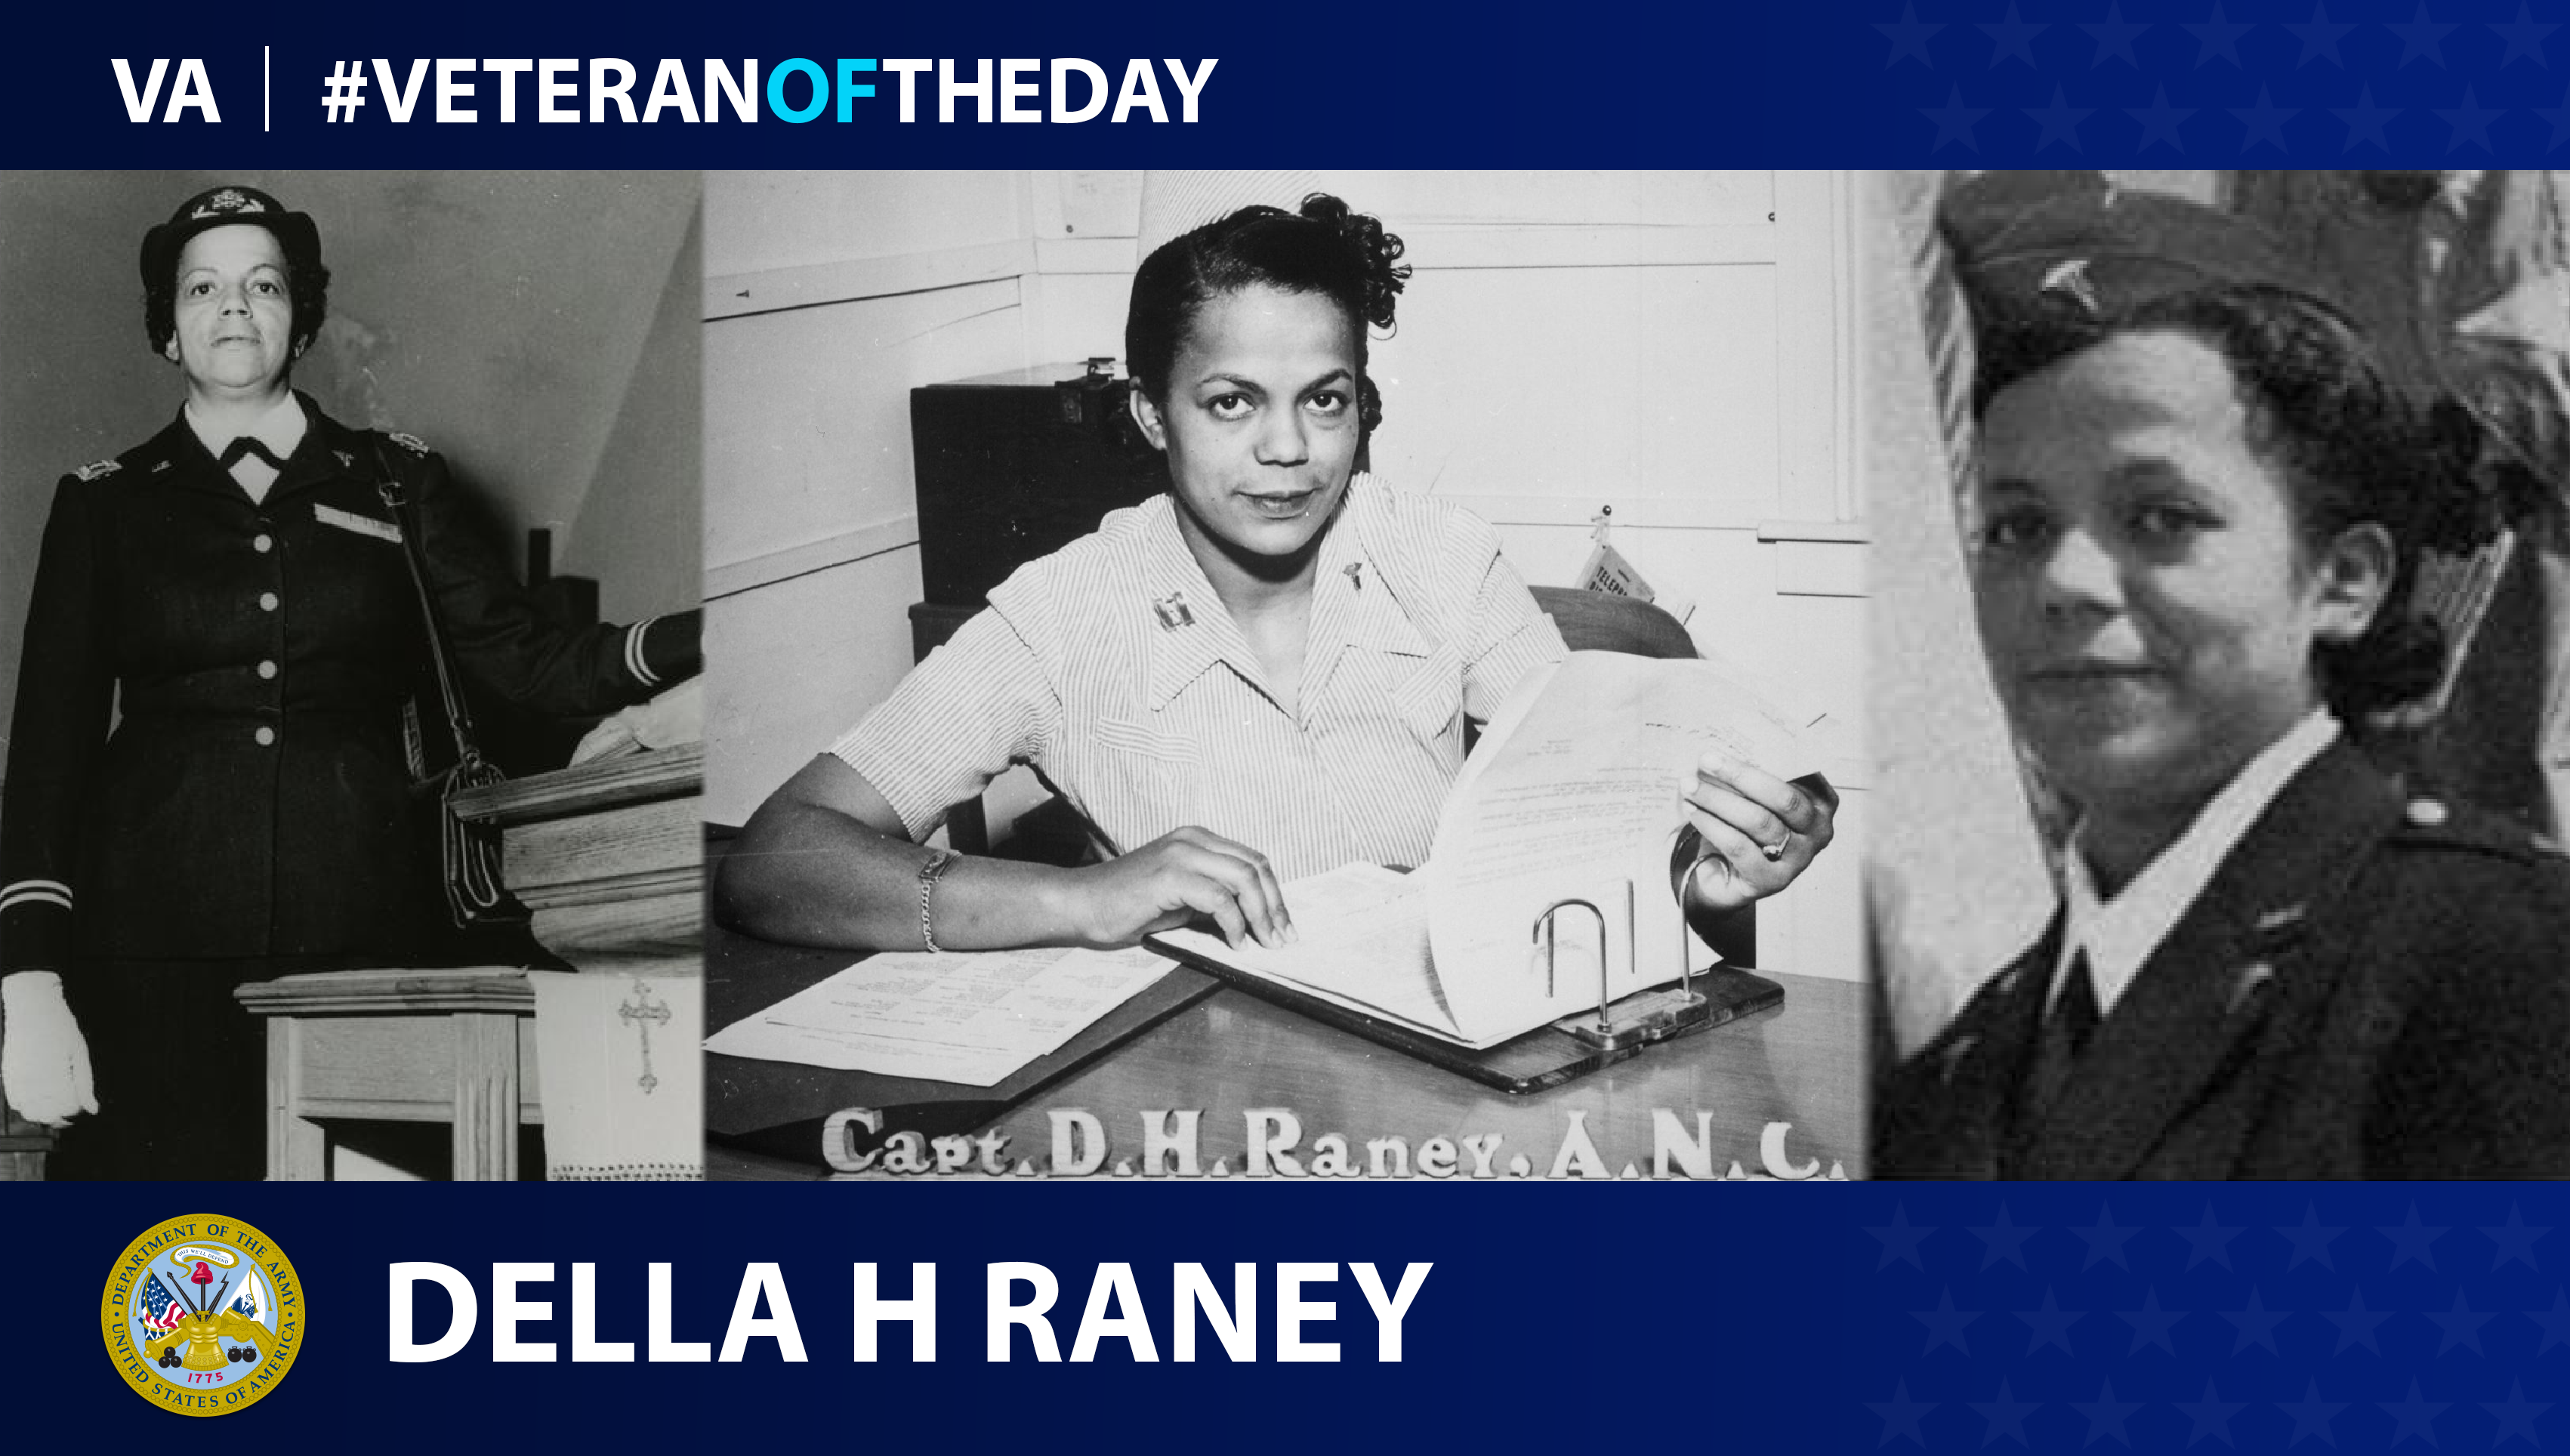 During Black History Month, today’s #VeteranOfTheDay is Army Veteran Della H. Raney Jackson, the first African American nurse in the Army.